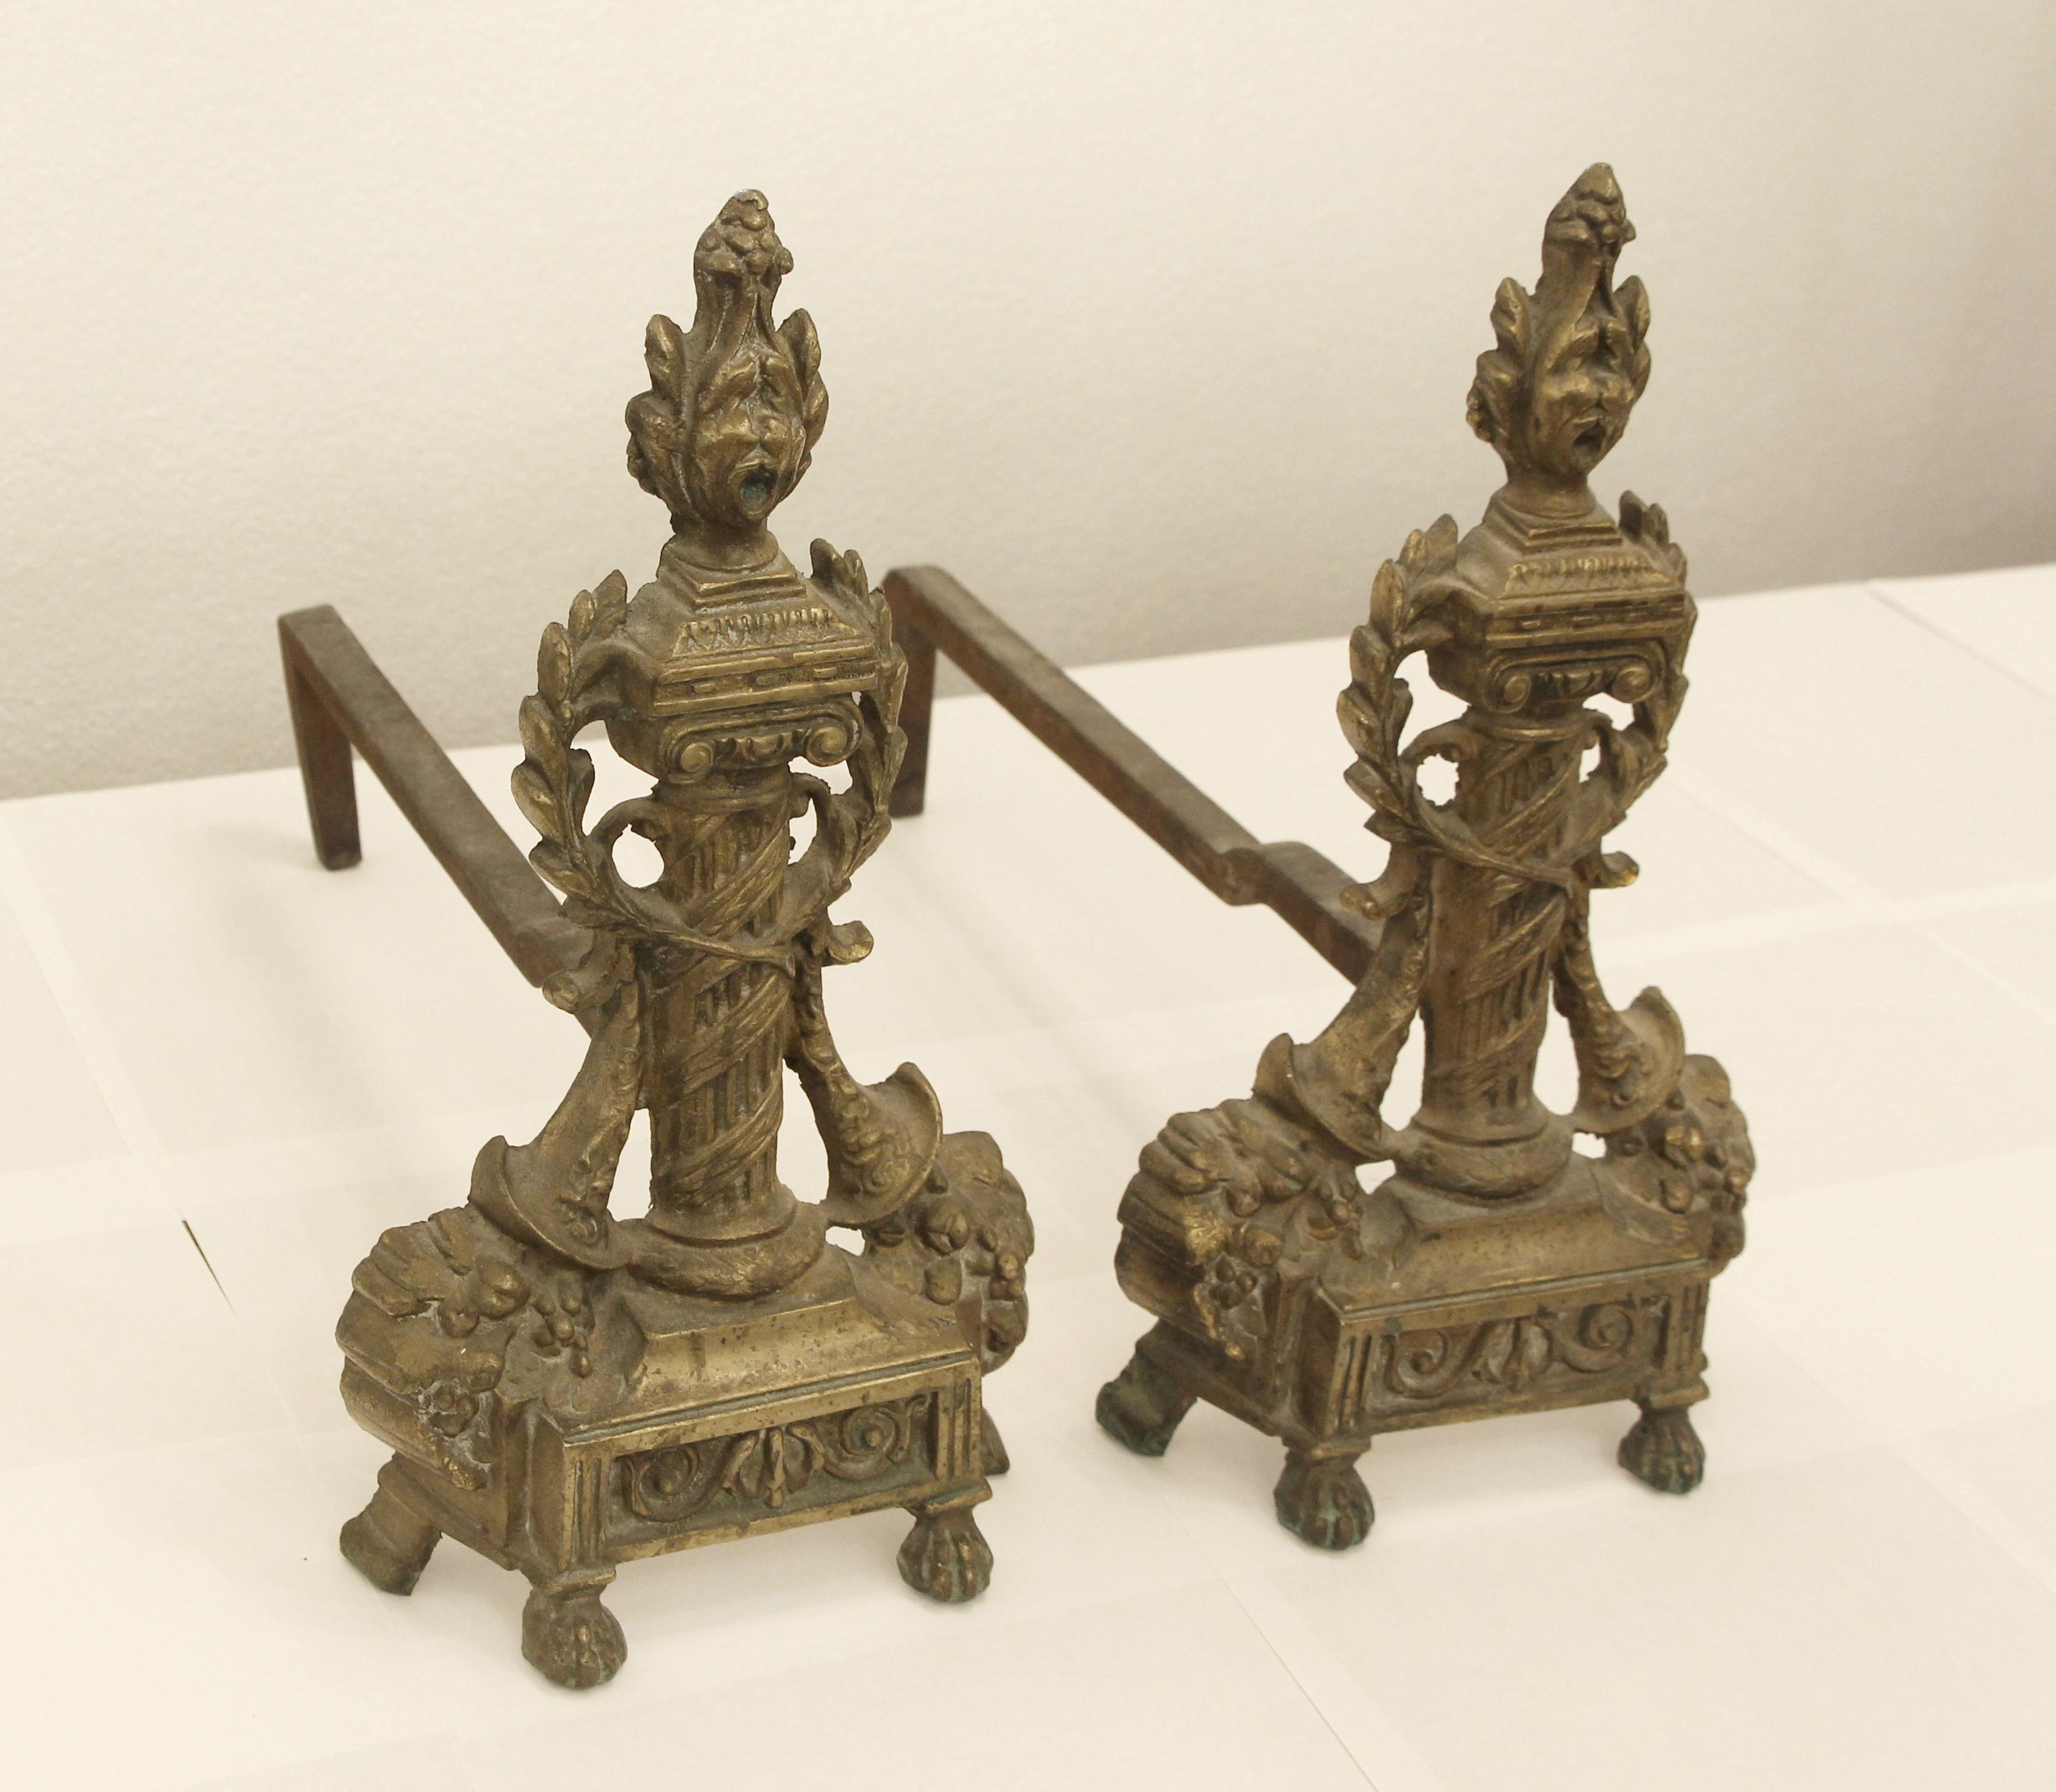 Highly ornate pair of 1940s French style andirons with bronze torch tops and iron dog legs. Sold as a pair. These can be seen at our 302 Bowery location in Manhattan.